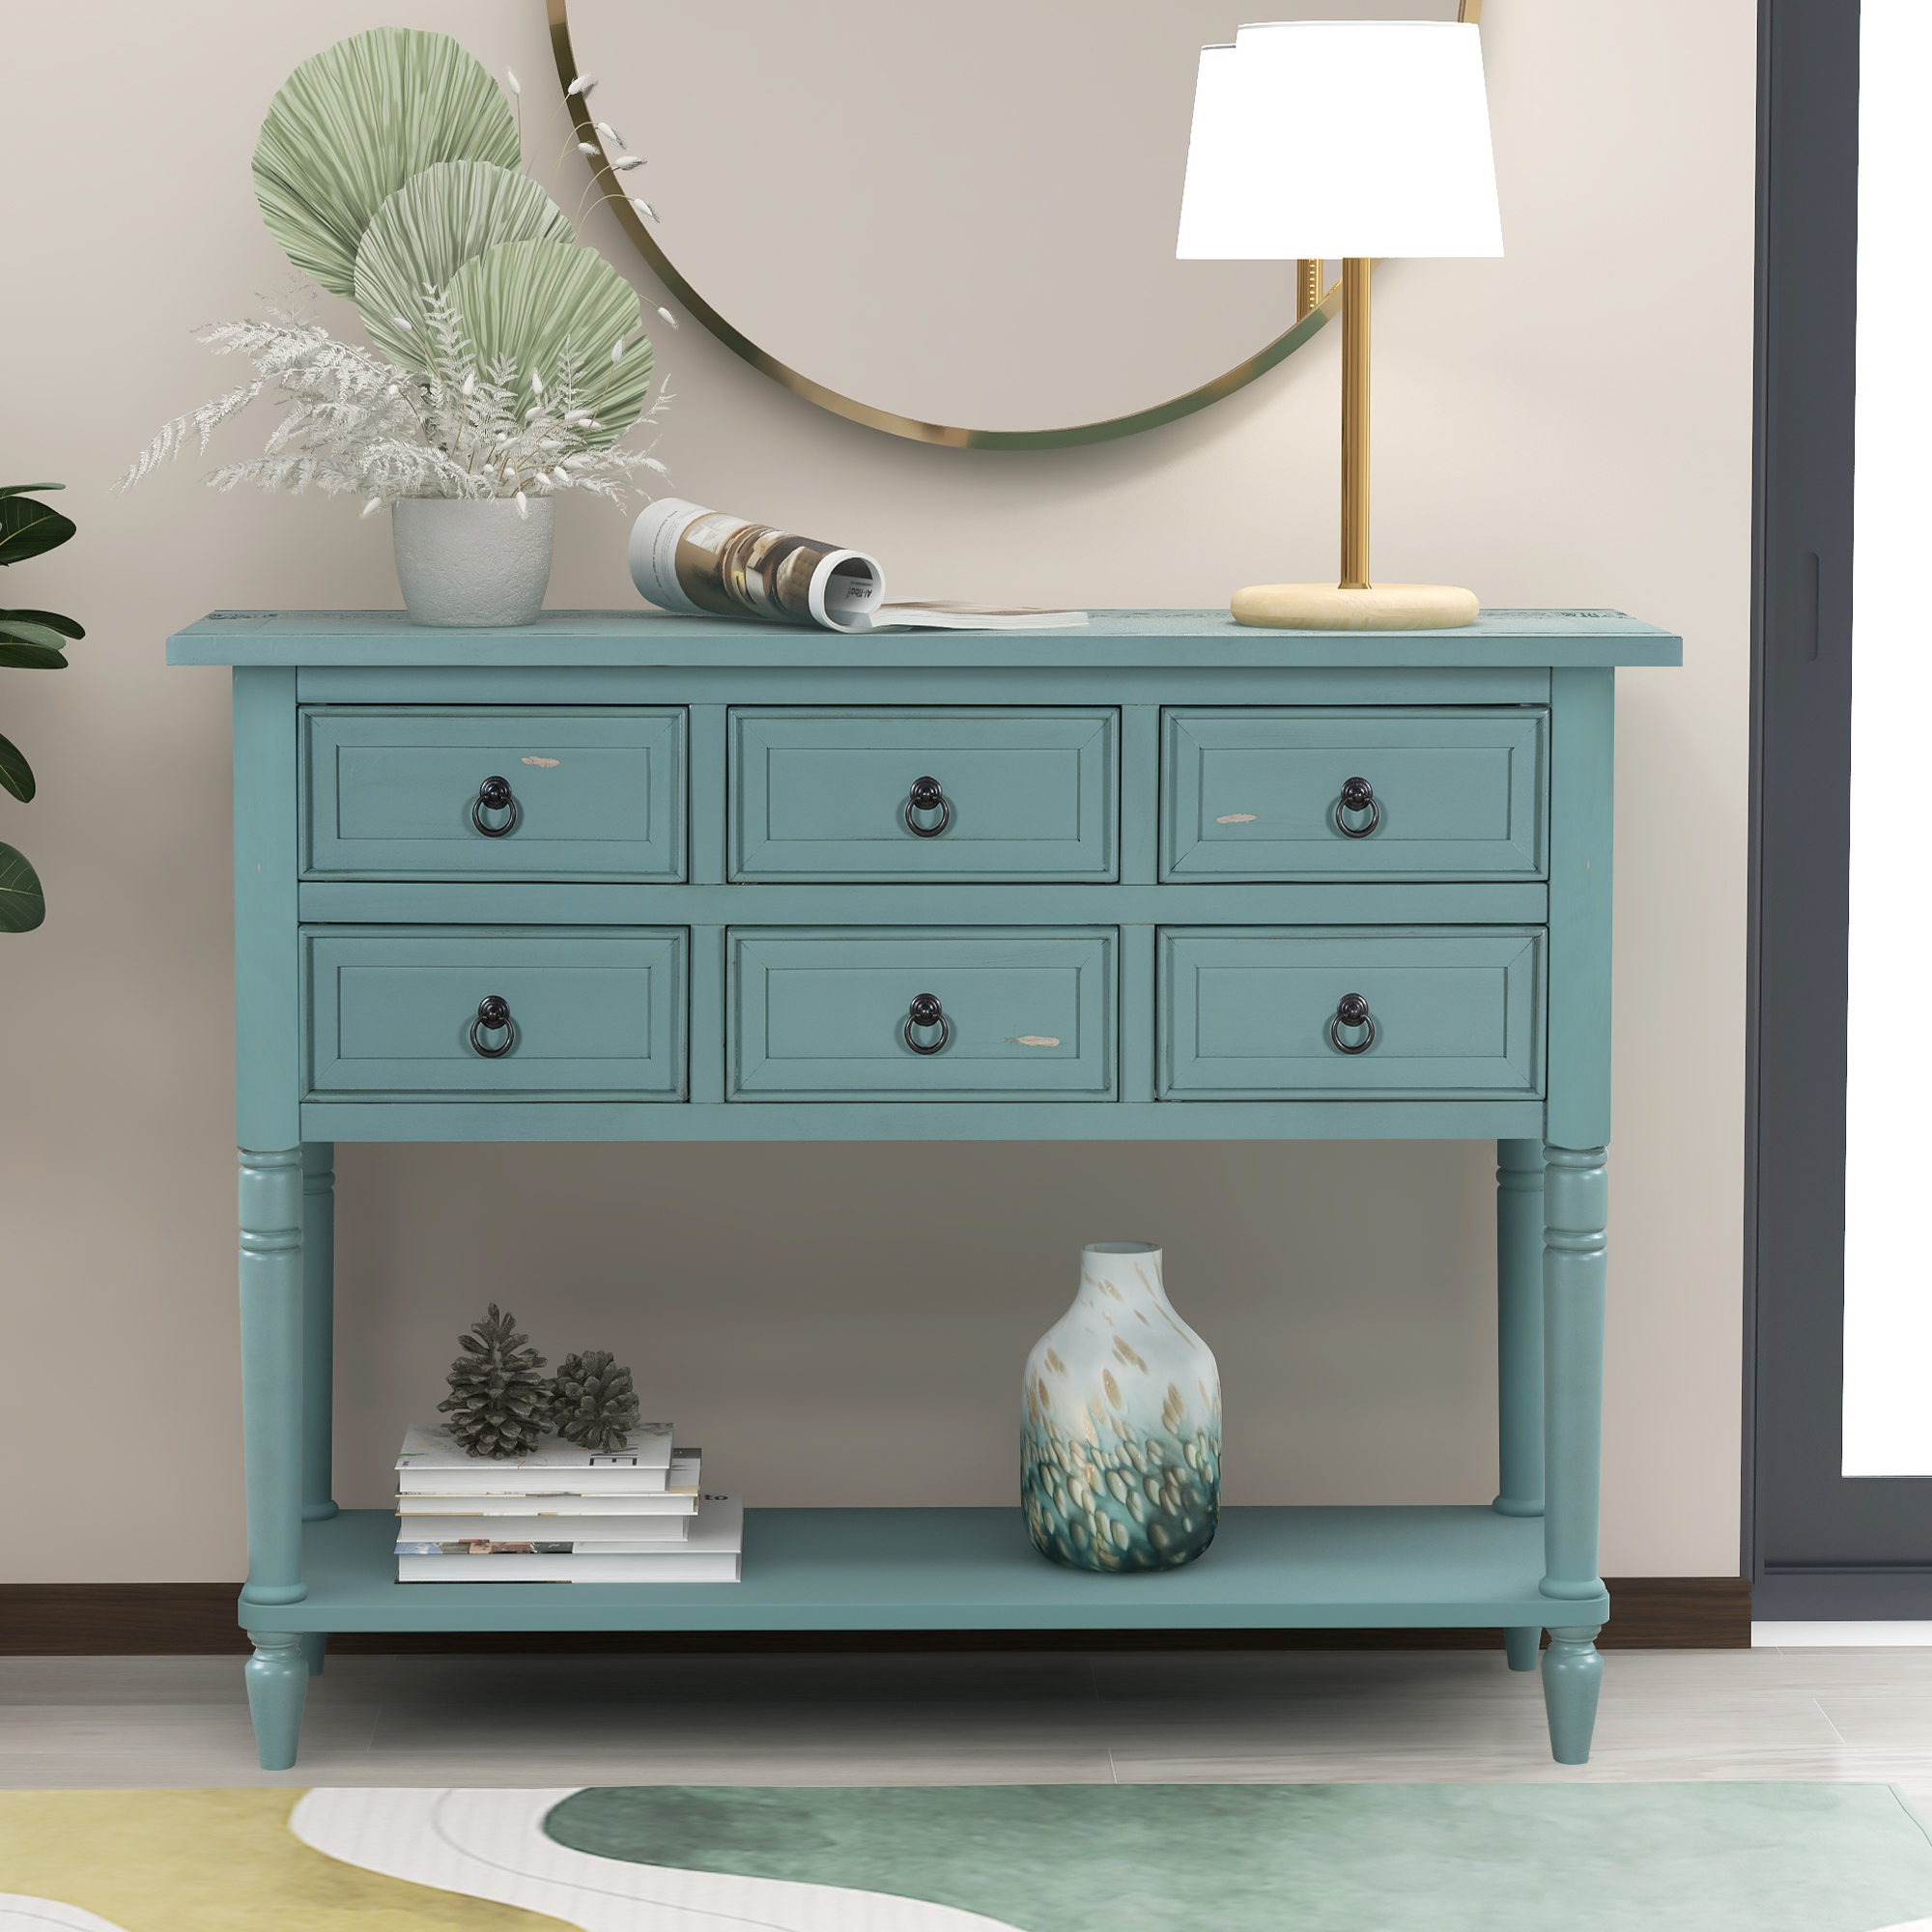 46" Modern Console Table With 6 Drawers And 1 Shelf - WF284792AAV